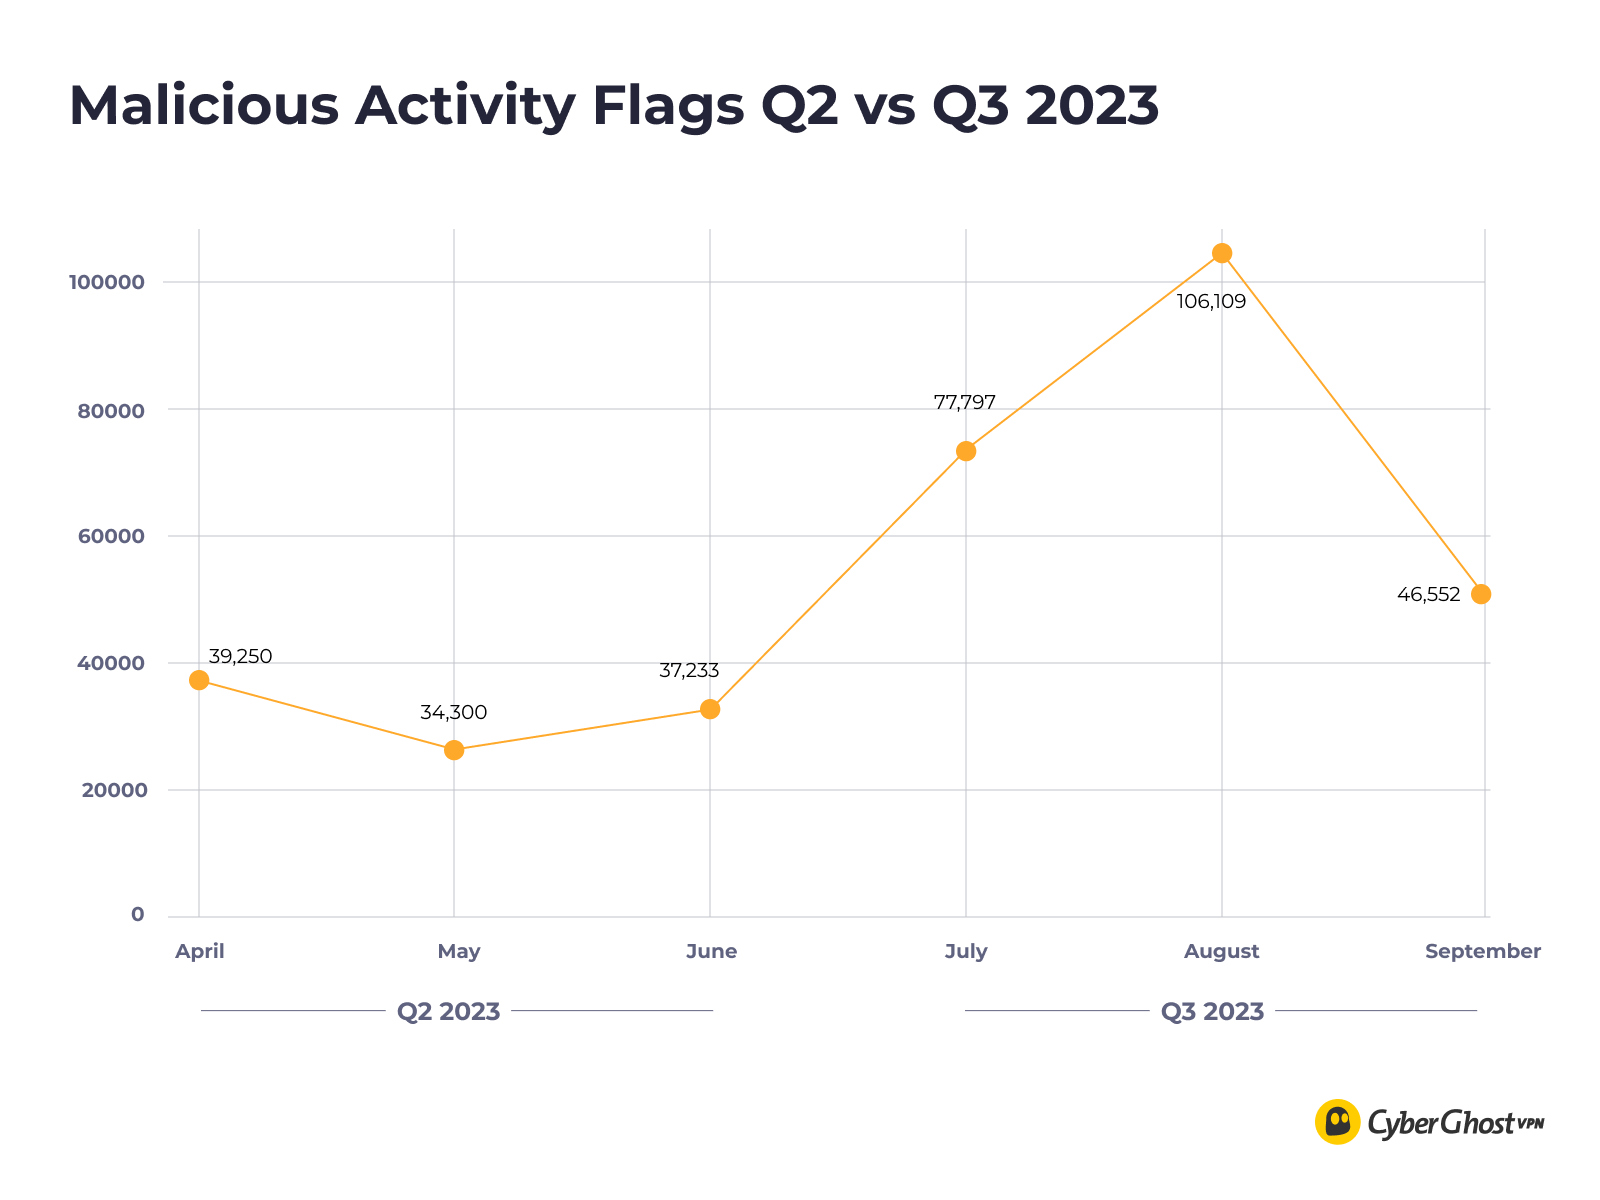 CyberGhost VPN's Quarterly Transparency Report numbers for malicious activity flags Q3 2023